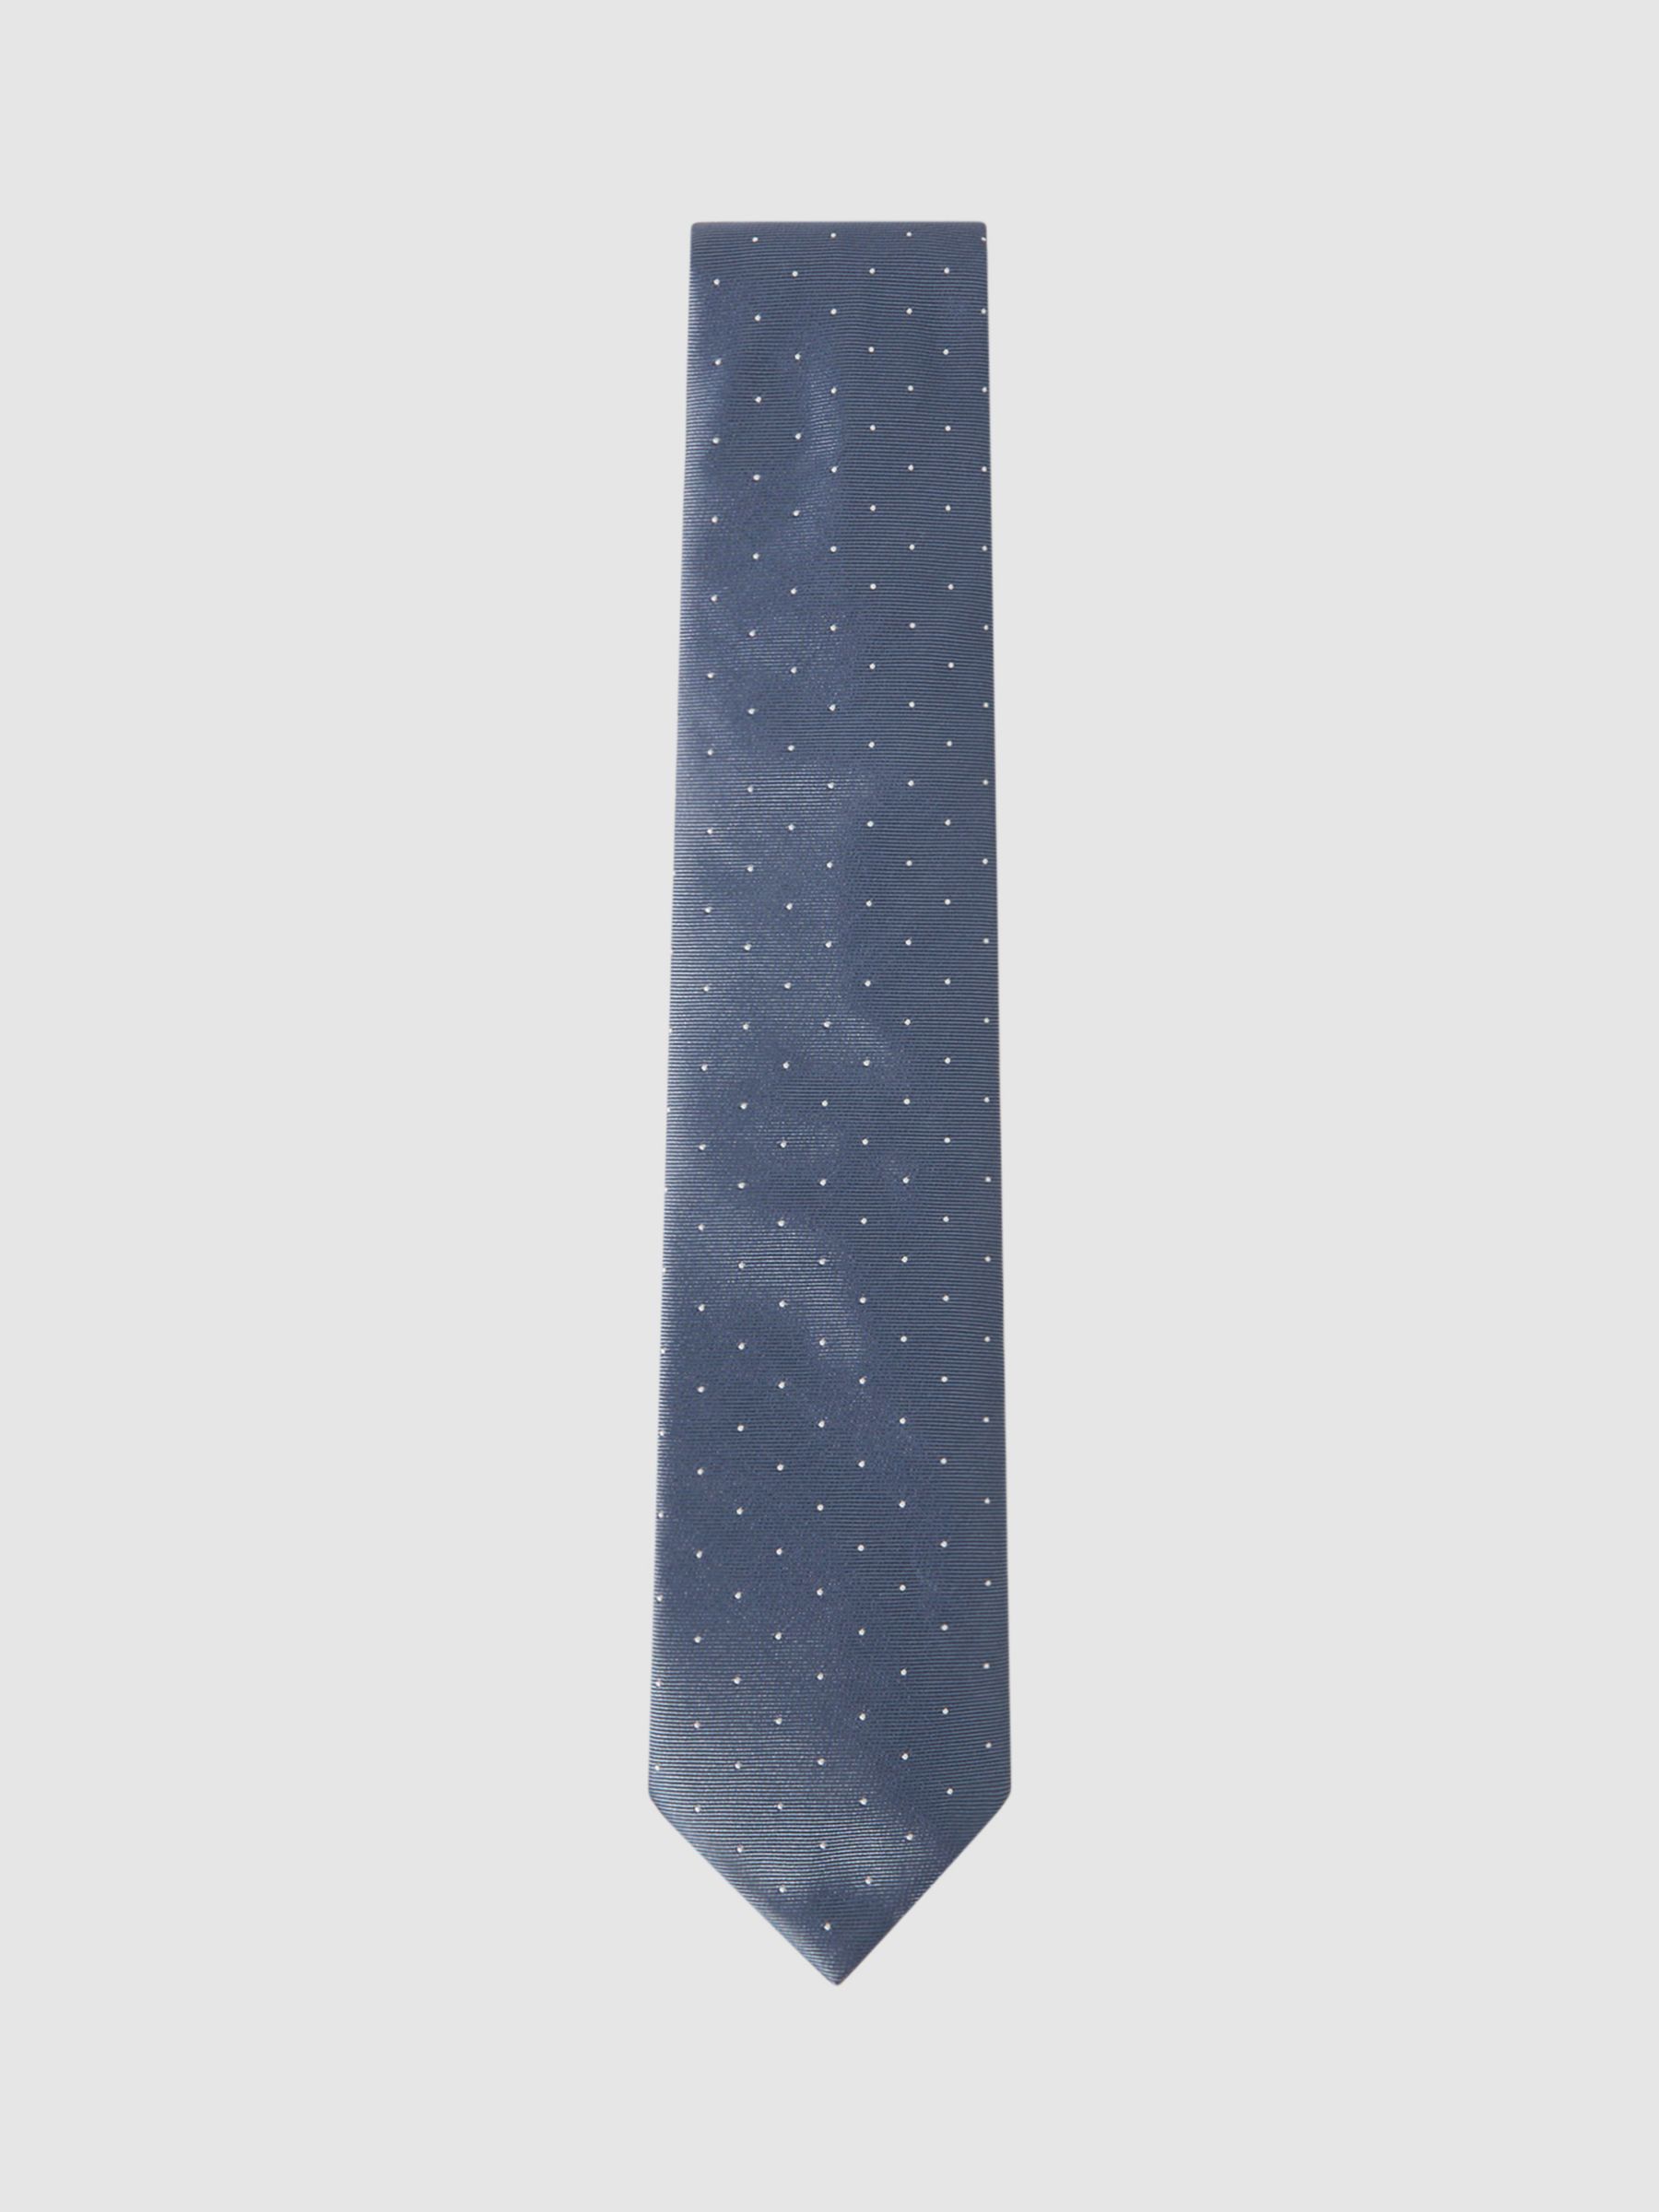 Black And Gold Tie | John Lewis & Partners